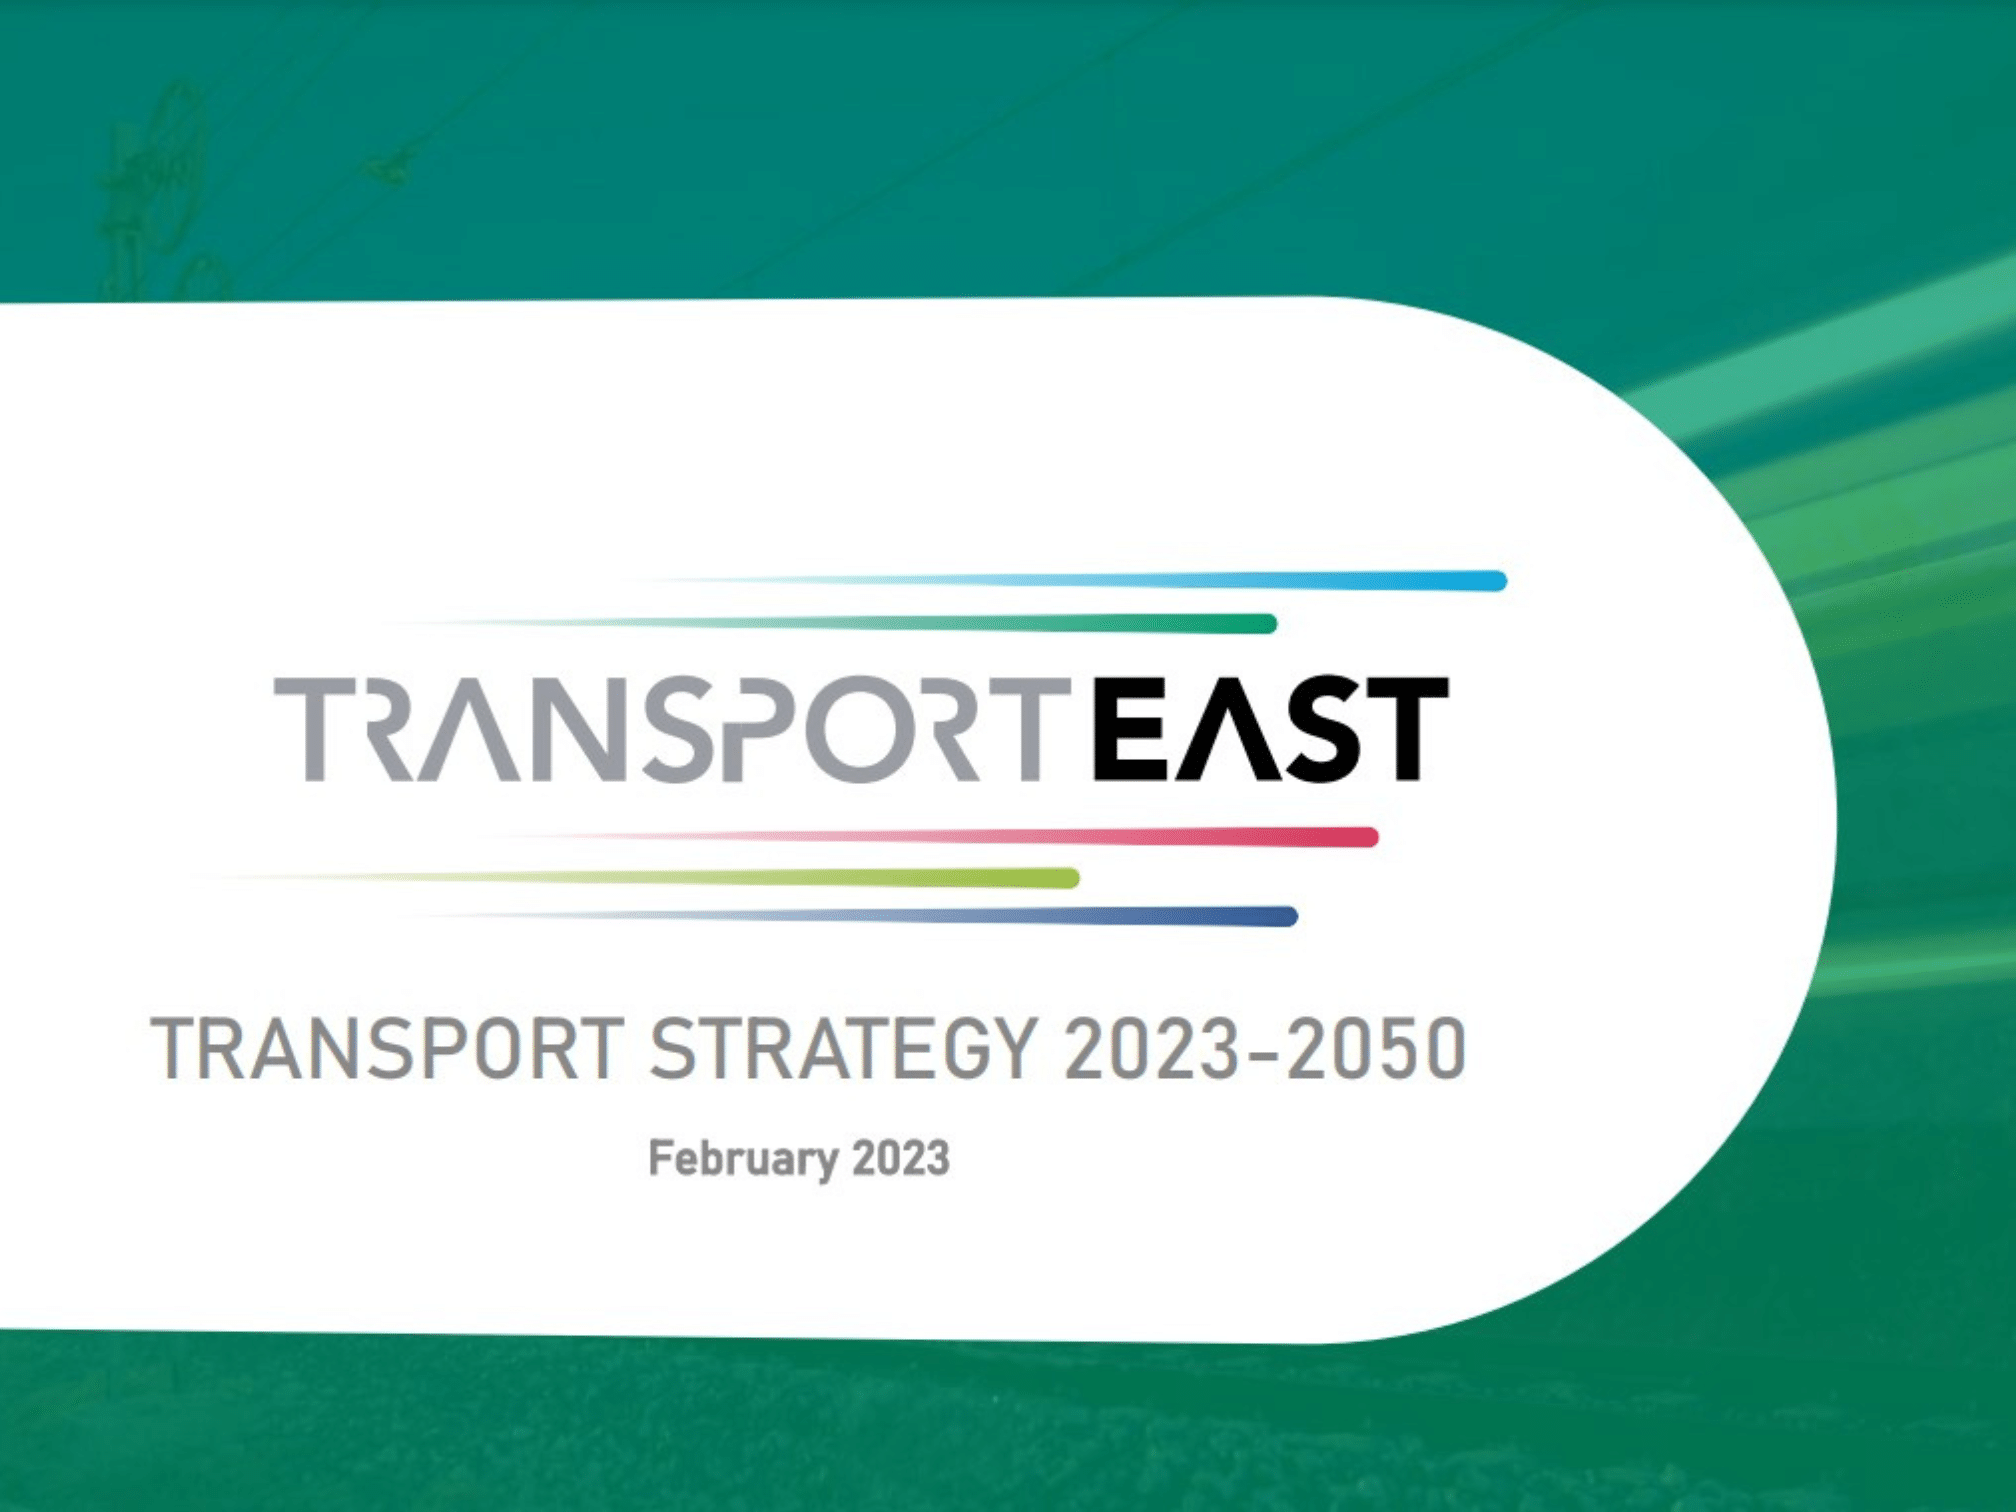 Transport East Transport Strategy 2023-2050. Green cover with Transport East logo